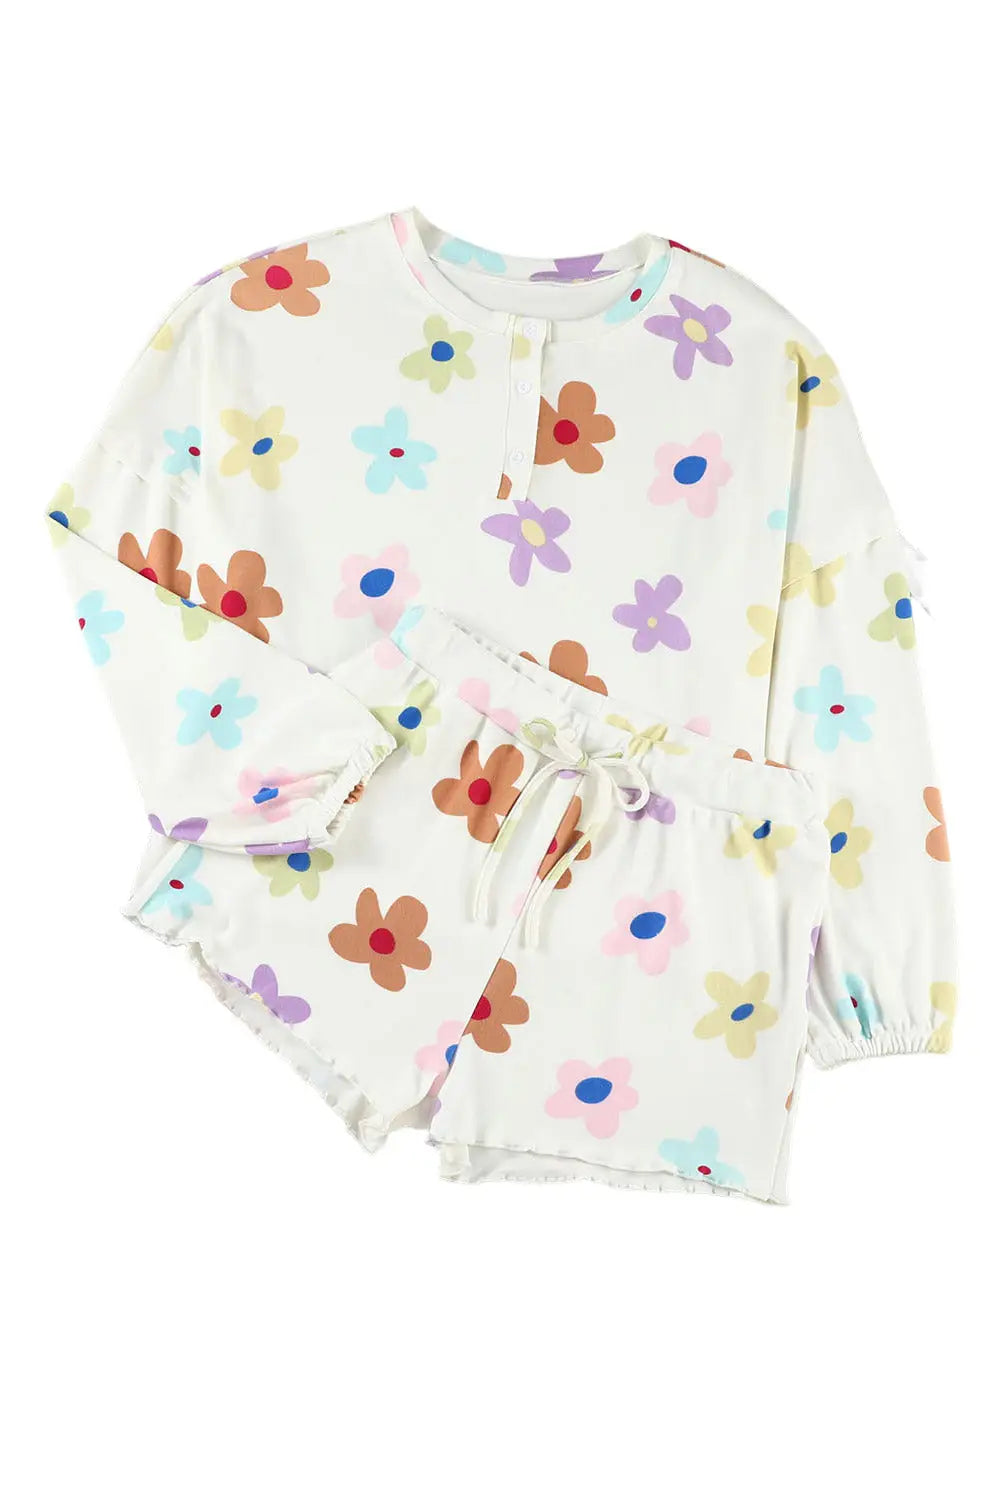 White floral long sleeve henley top and drawstring shorts